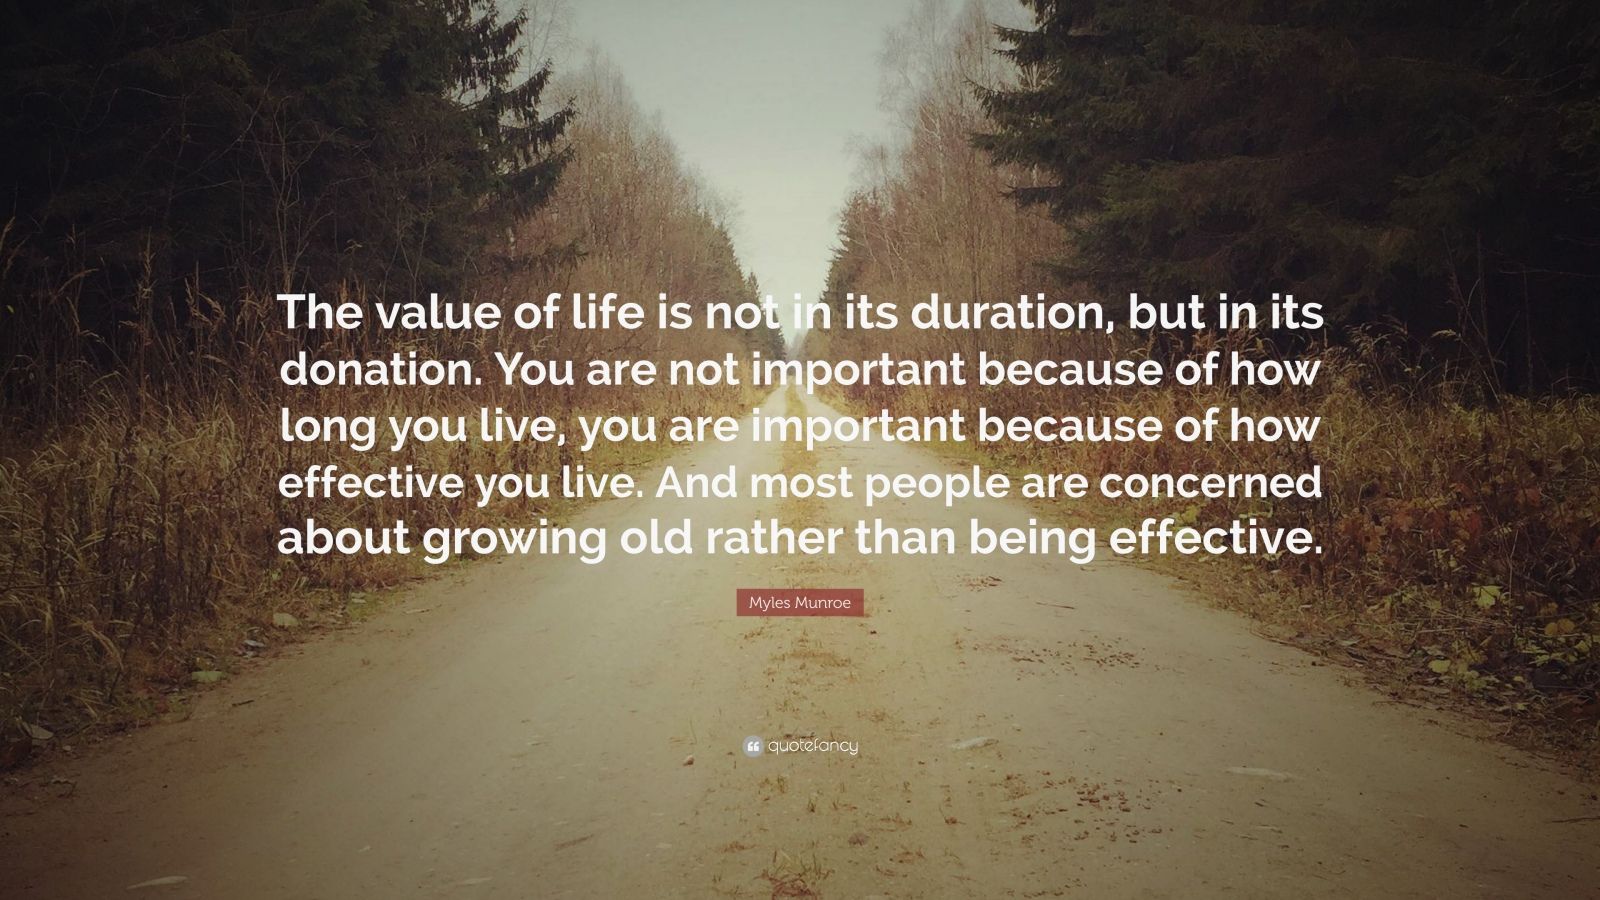 Myles Munroe Quote: “The value of life is not in its duration, but in